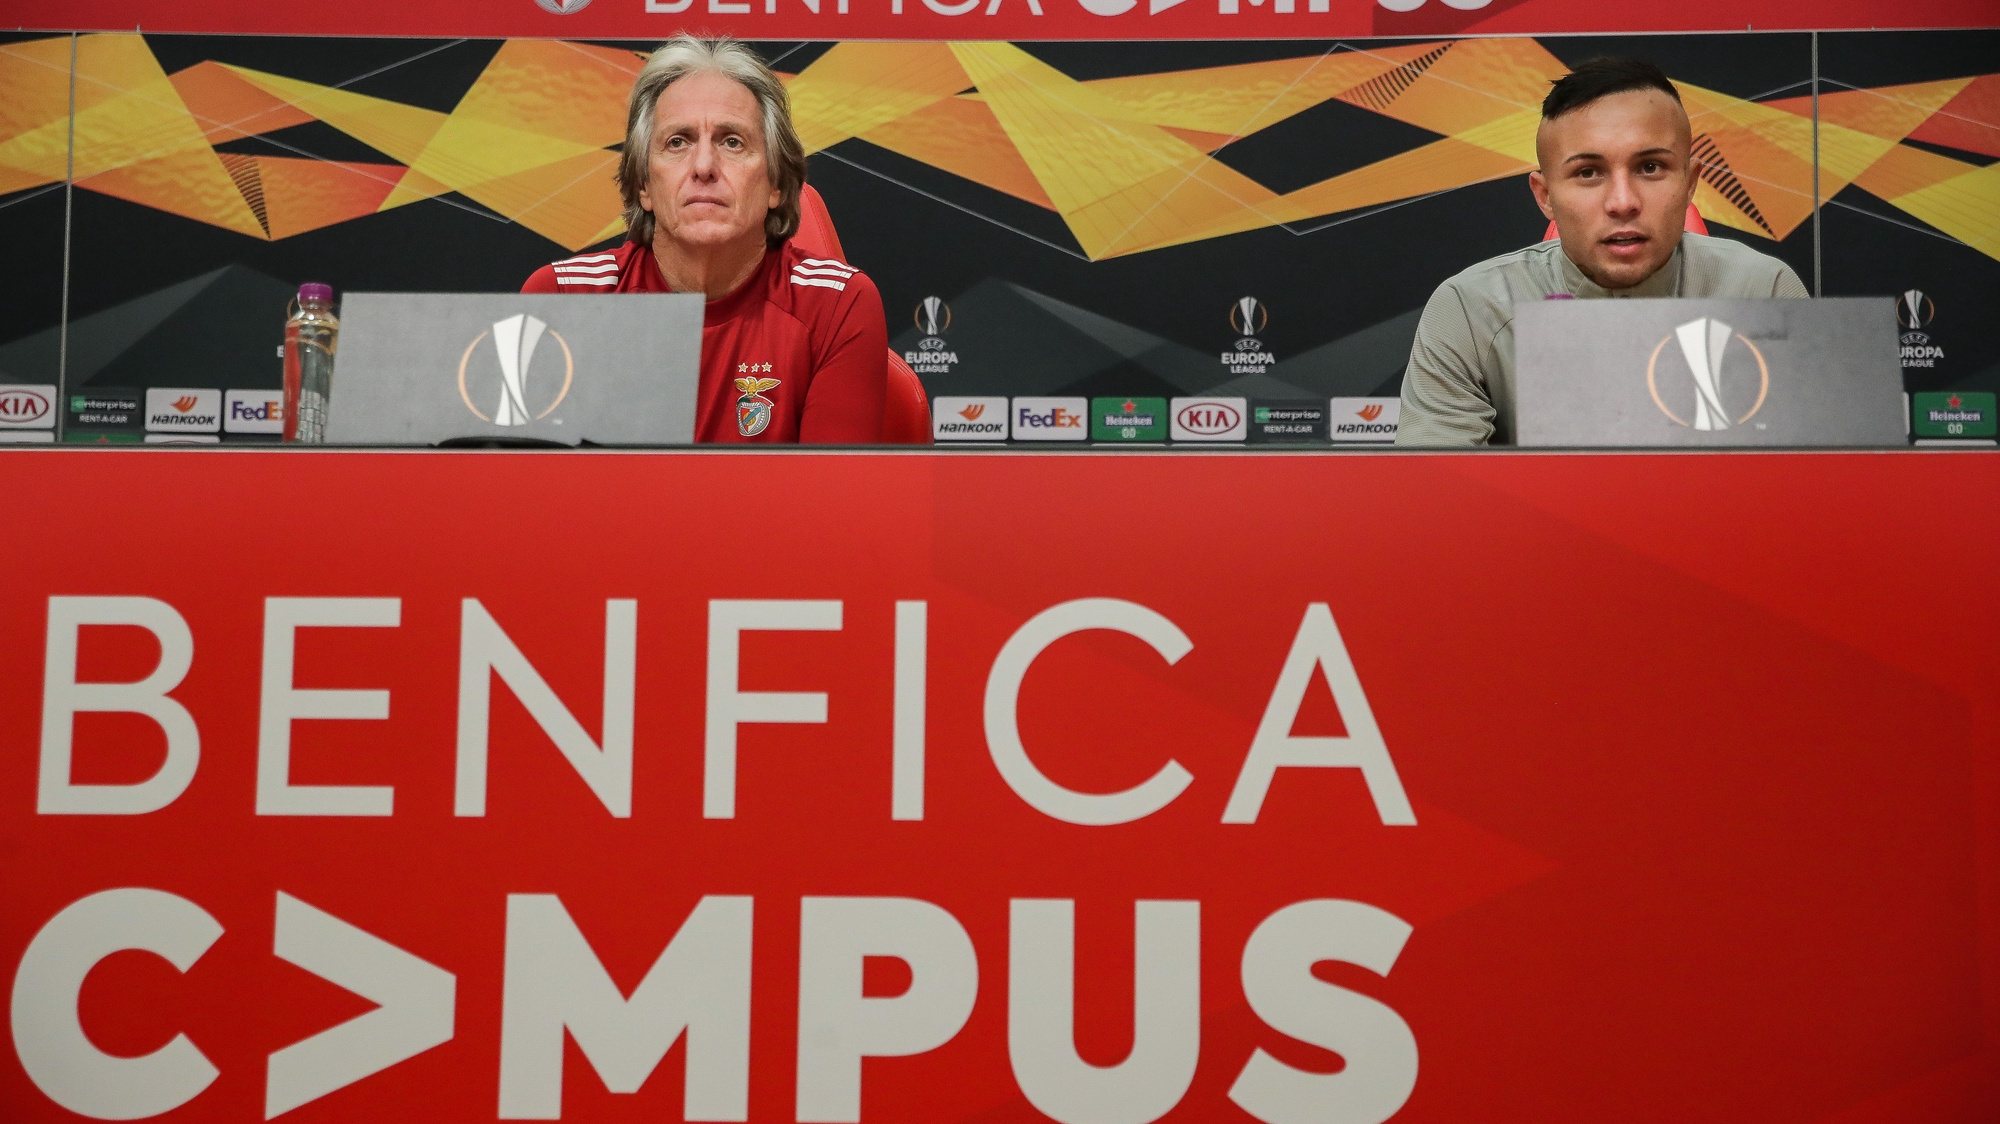 SL Benfica&#039;s head coach Jorge Jesus (L) and his player Cebolinha (R) attend a press conference at Benfica Campus in Seixal, near Lisbon, Portugal, 2 December 2020. SL Benfica will play against Lech Poznan in their UEFA Europa League Group D match on 3 November 2020. MÁRIO CRUZ/LUSA